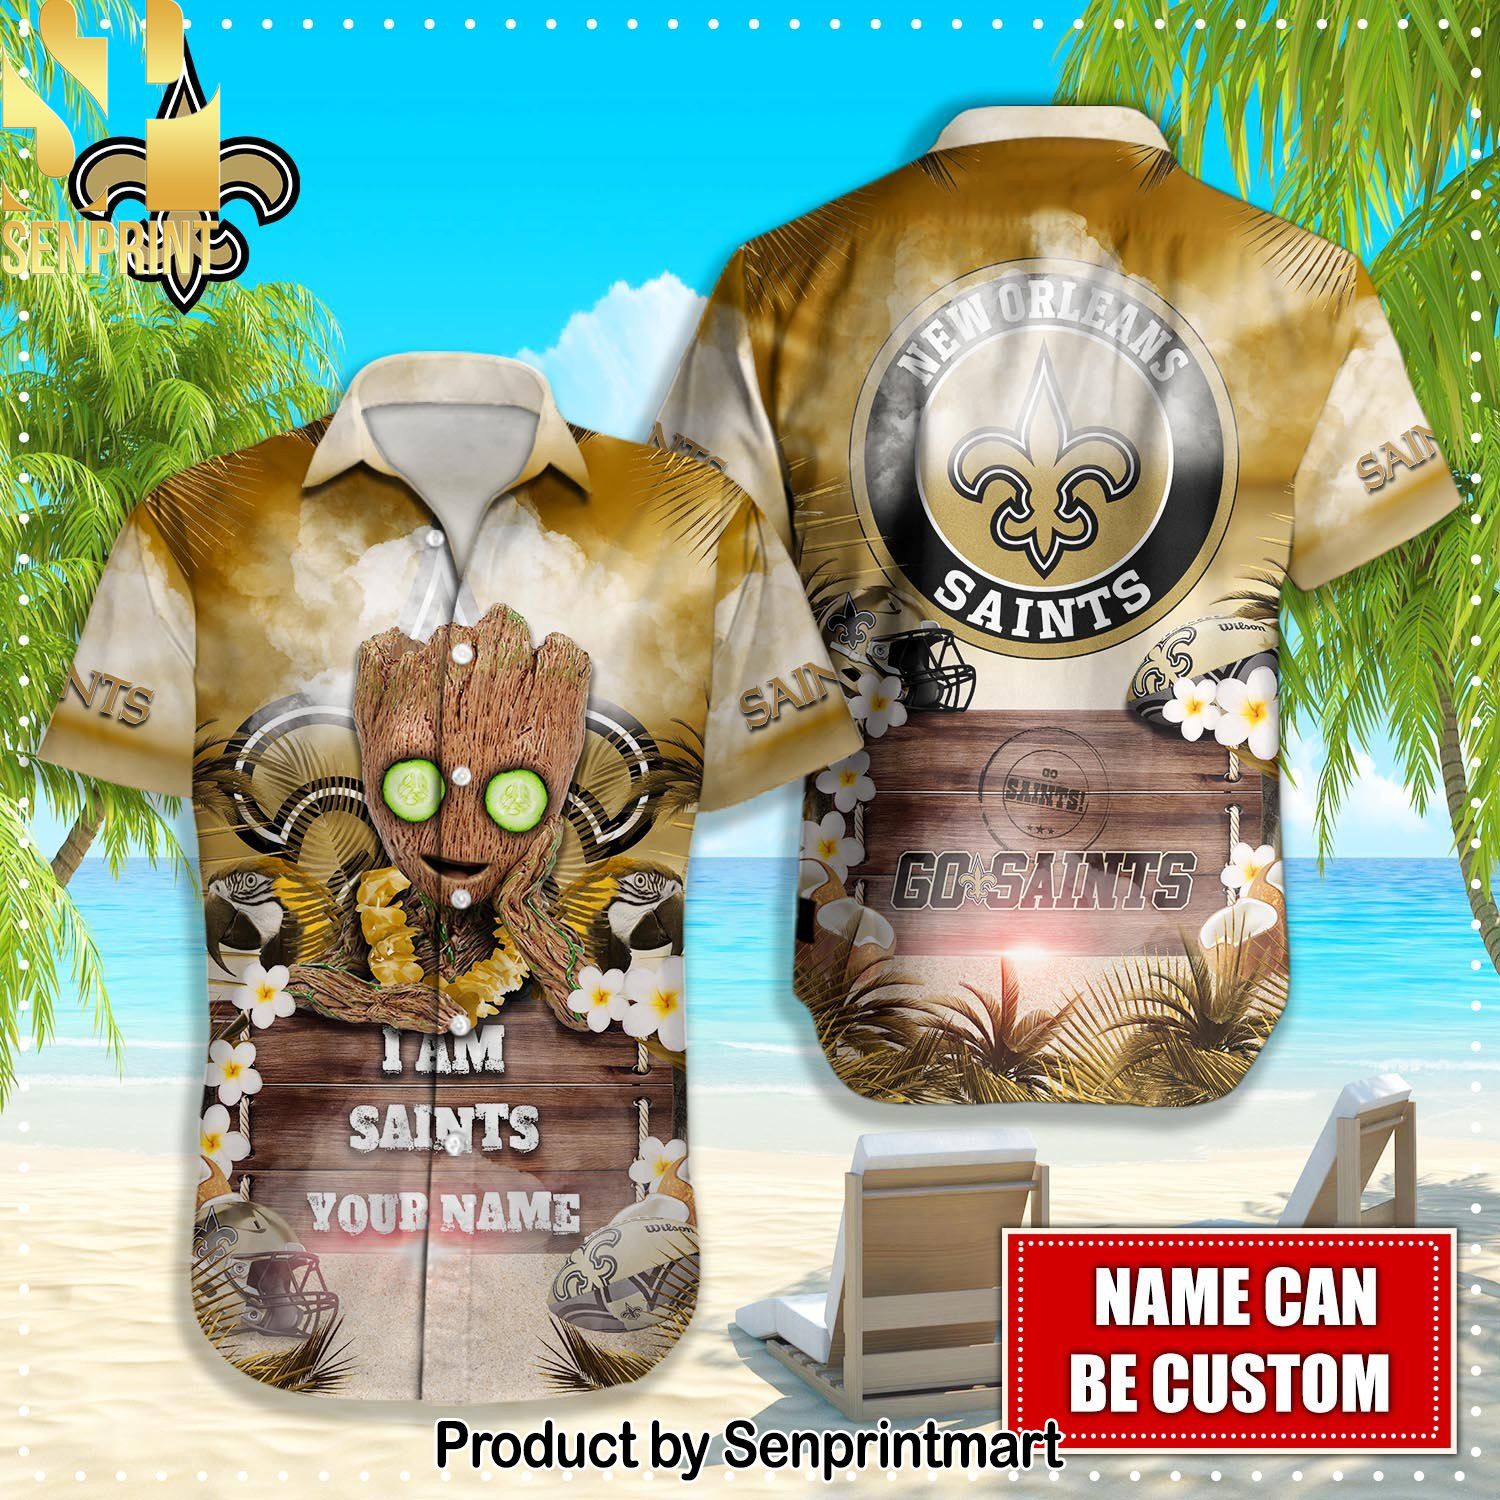 New Orleans Saints NFL Awesome Outfit Hawaiian Shirt and Shorts